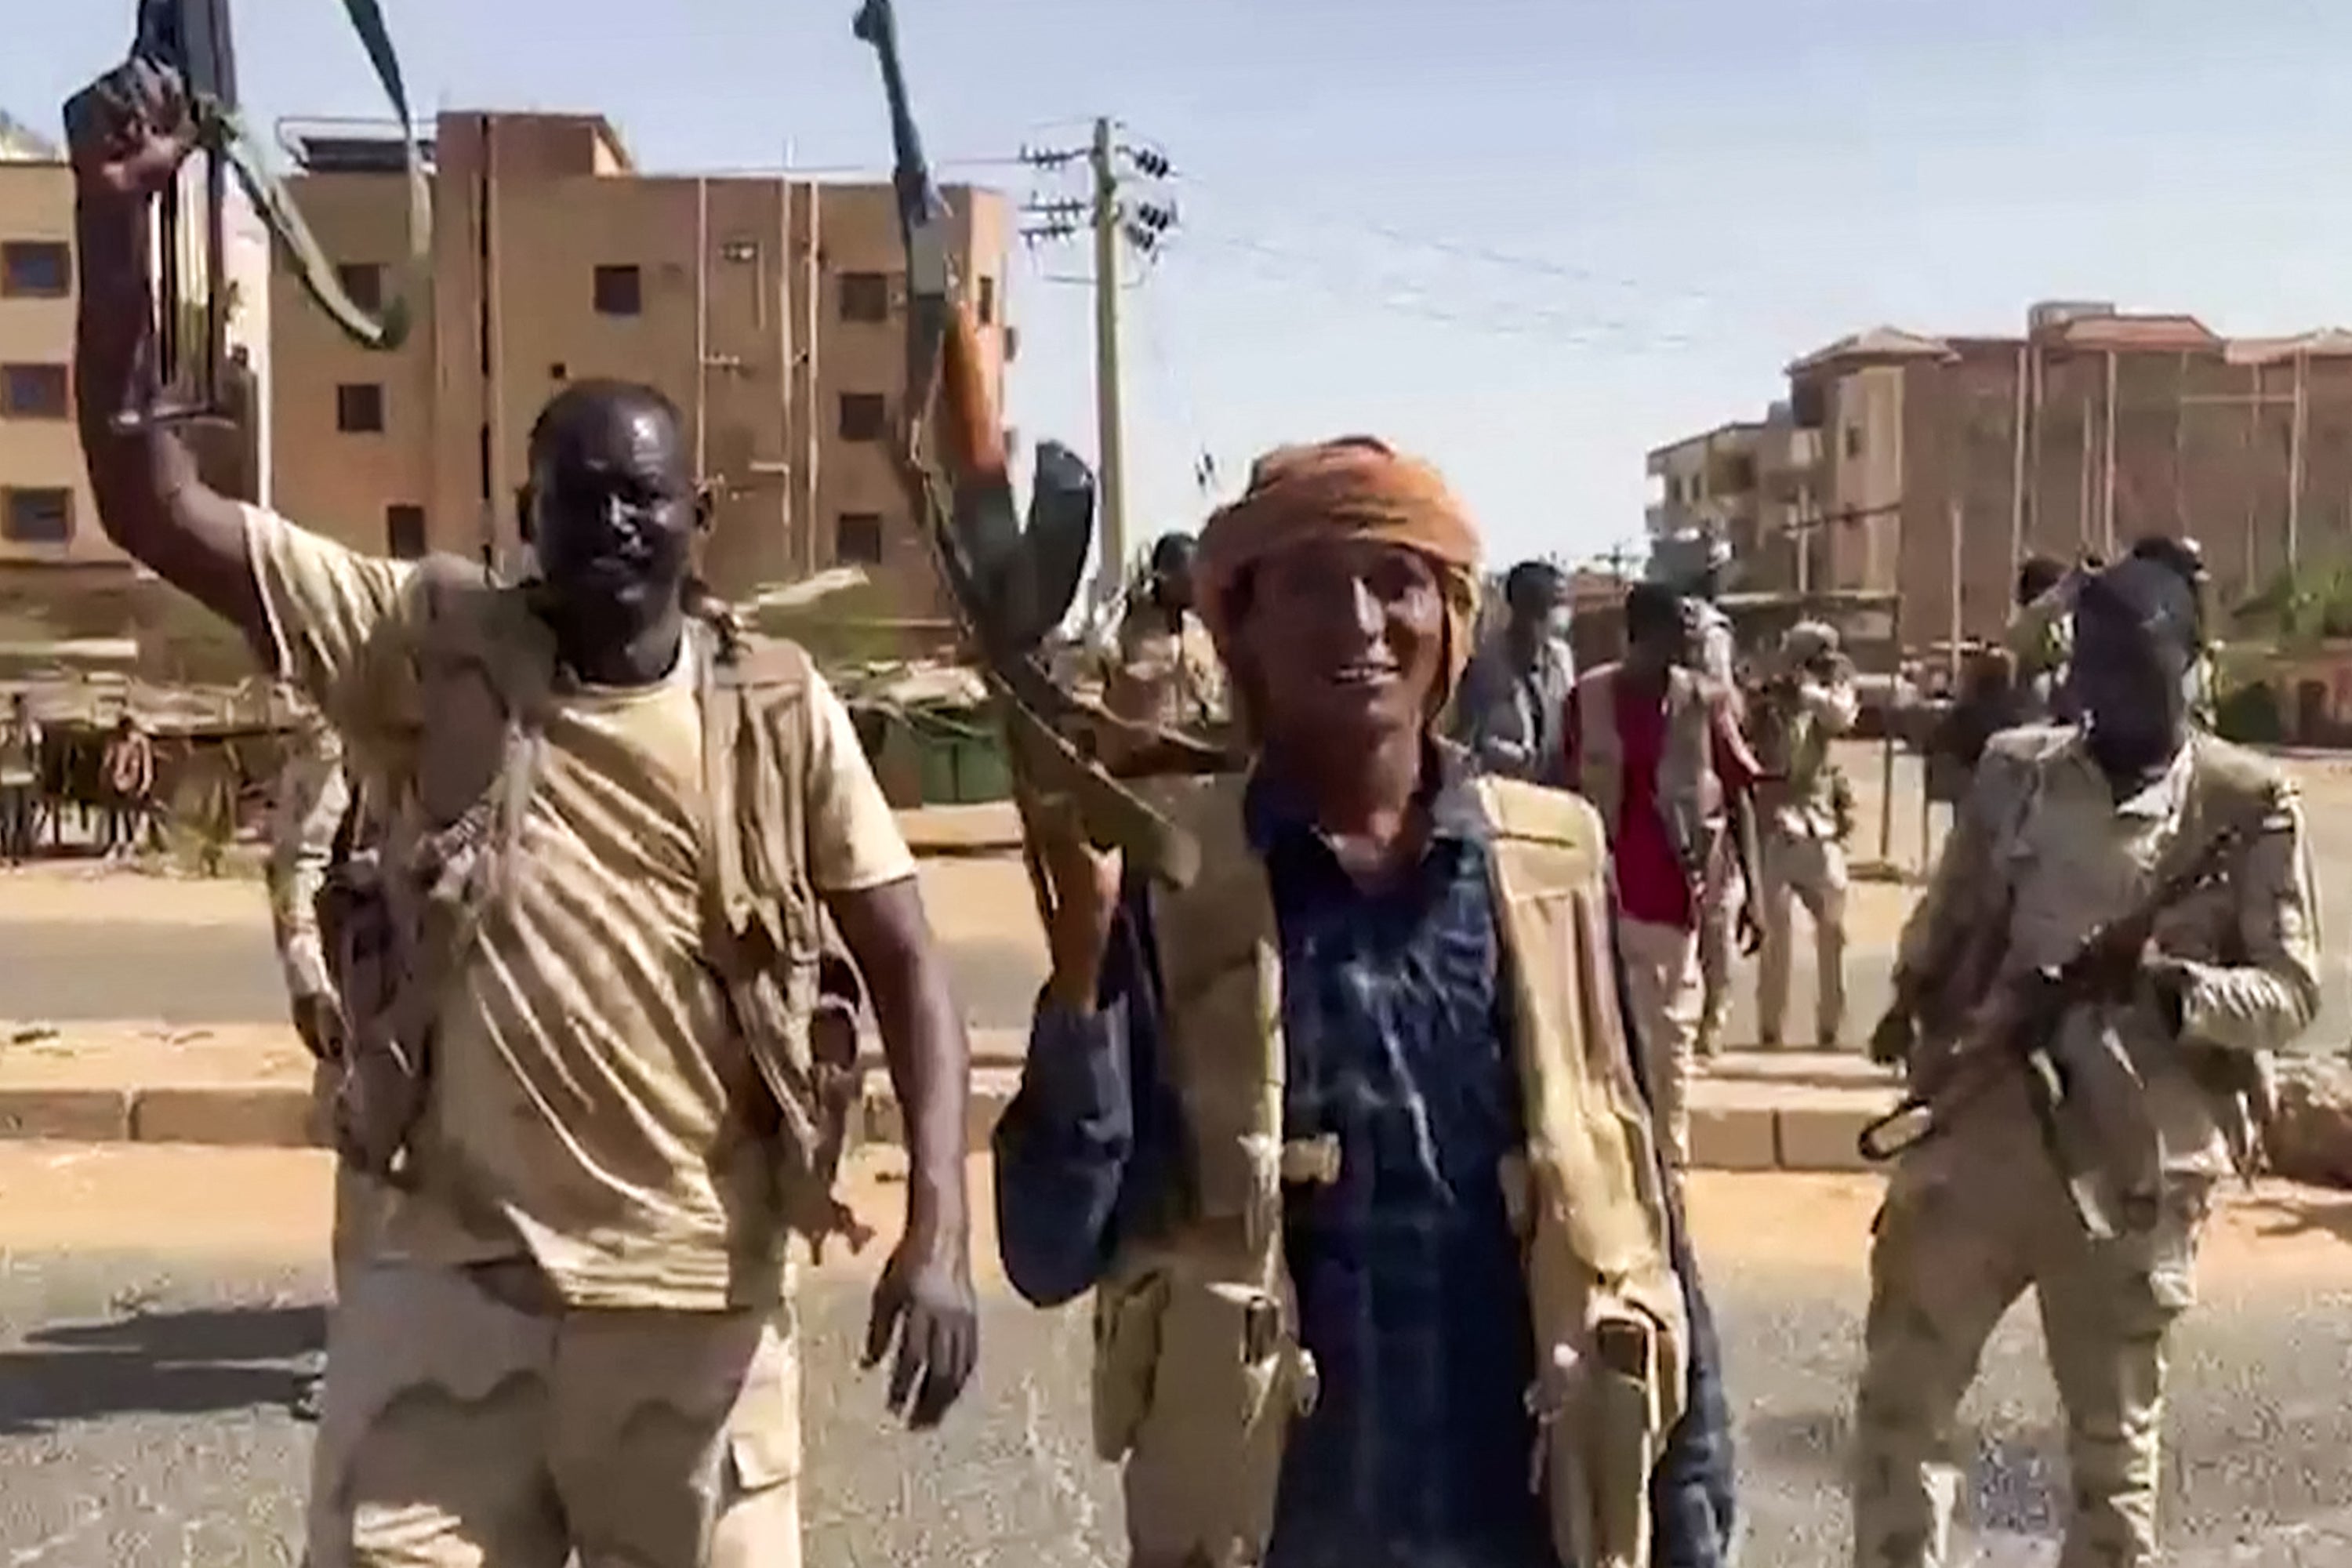 The RSF has been fighting the regular Sudanese army